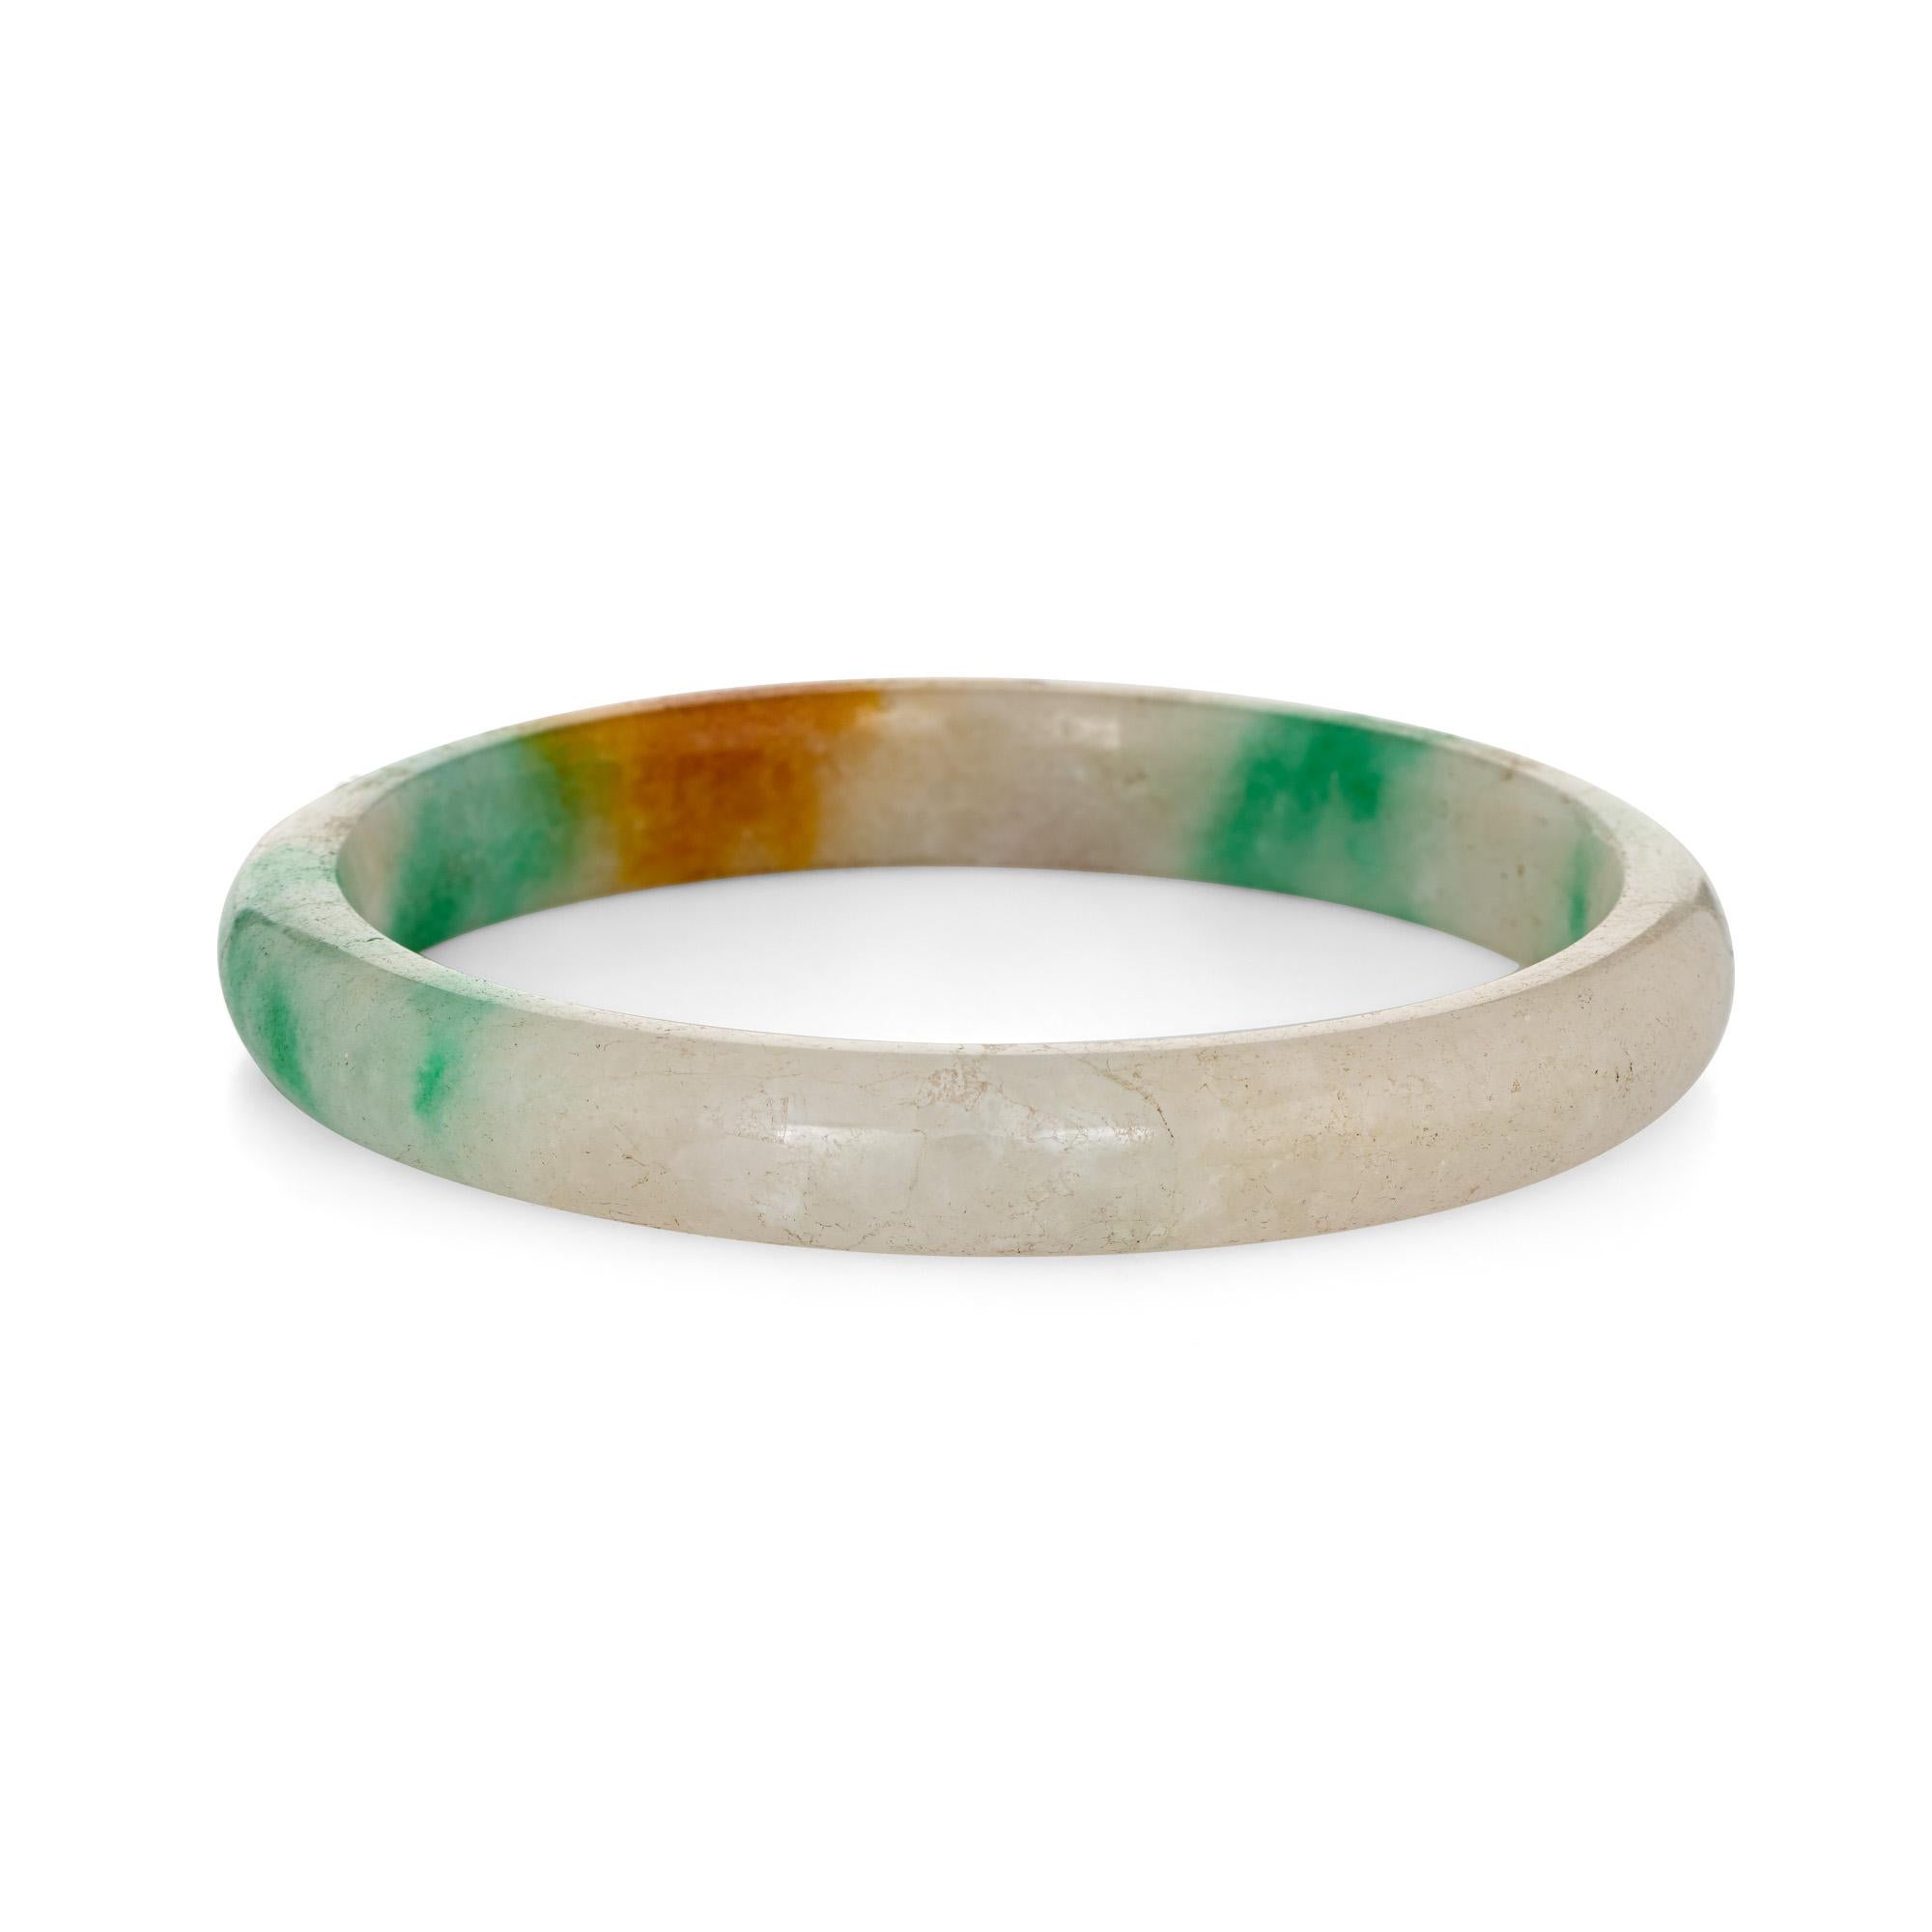 Jadeite jade bangle bracelet. 

The jade bracelet measures 11.5mm wide (0.45 inches).      

The jade graduates in color from green to orange and white. The bracelet is large in size and is designed to slip over the wrist (inner diameter is 2.75